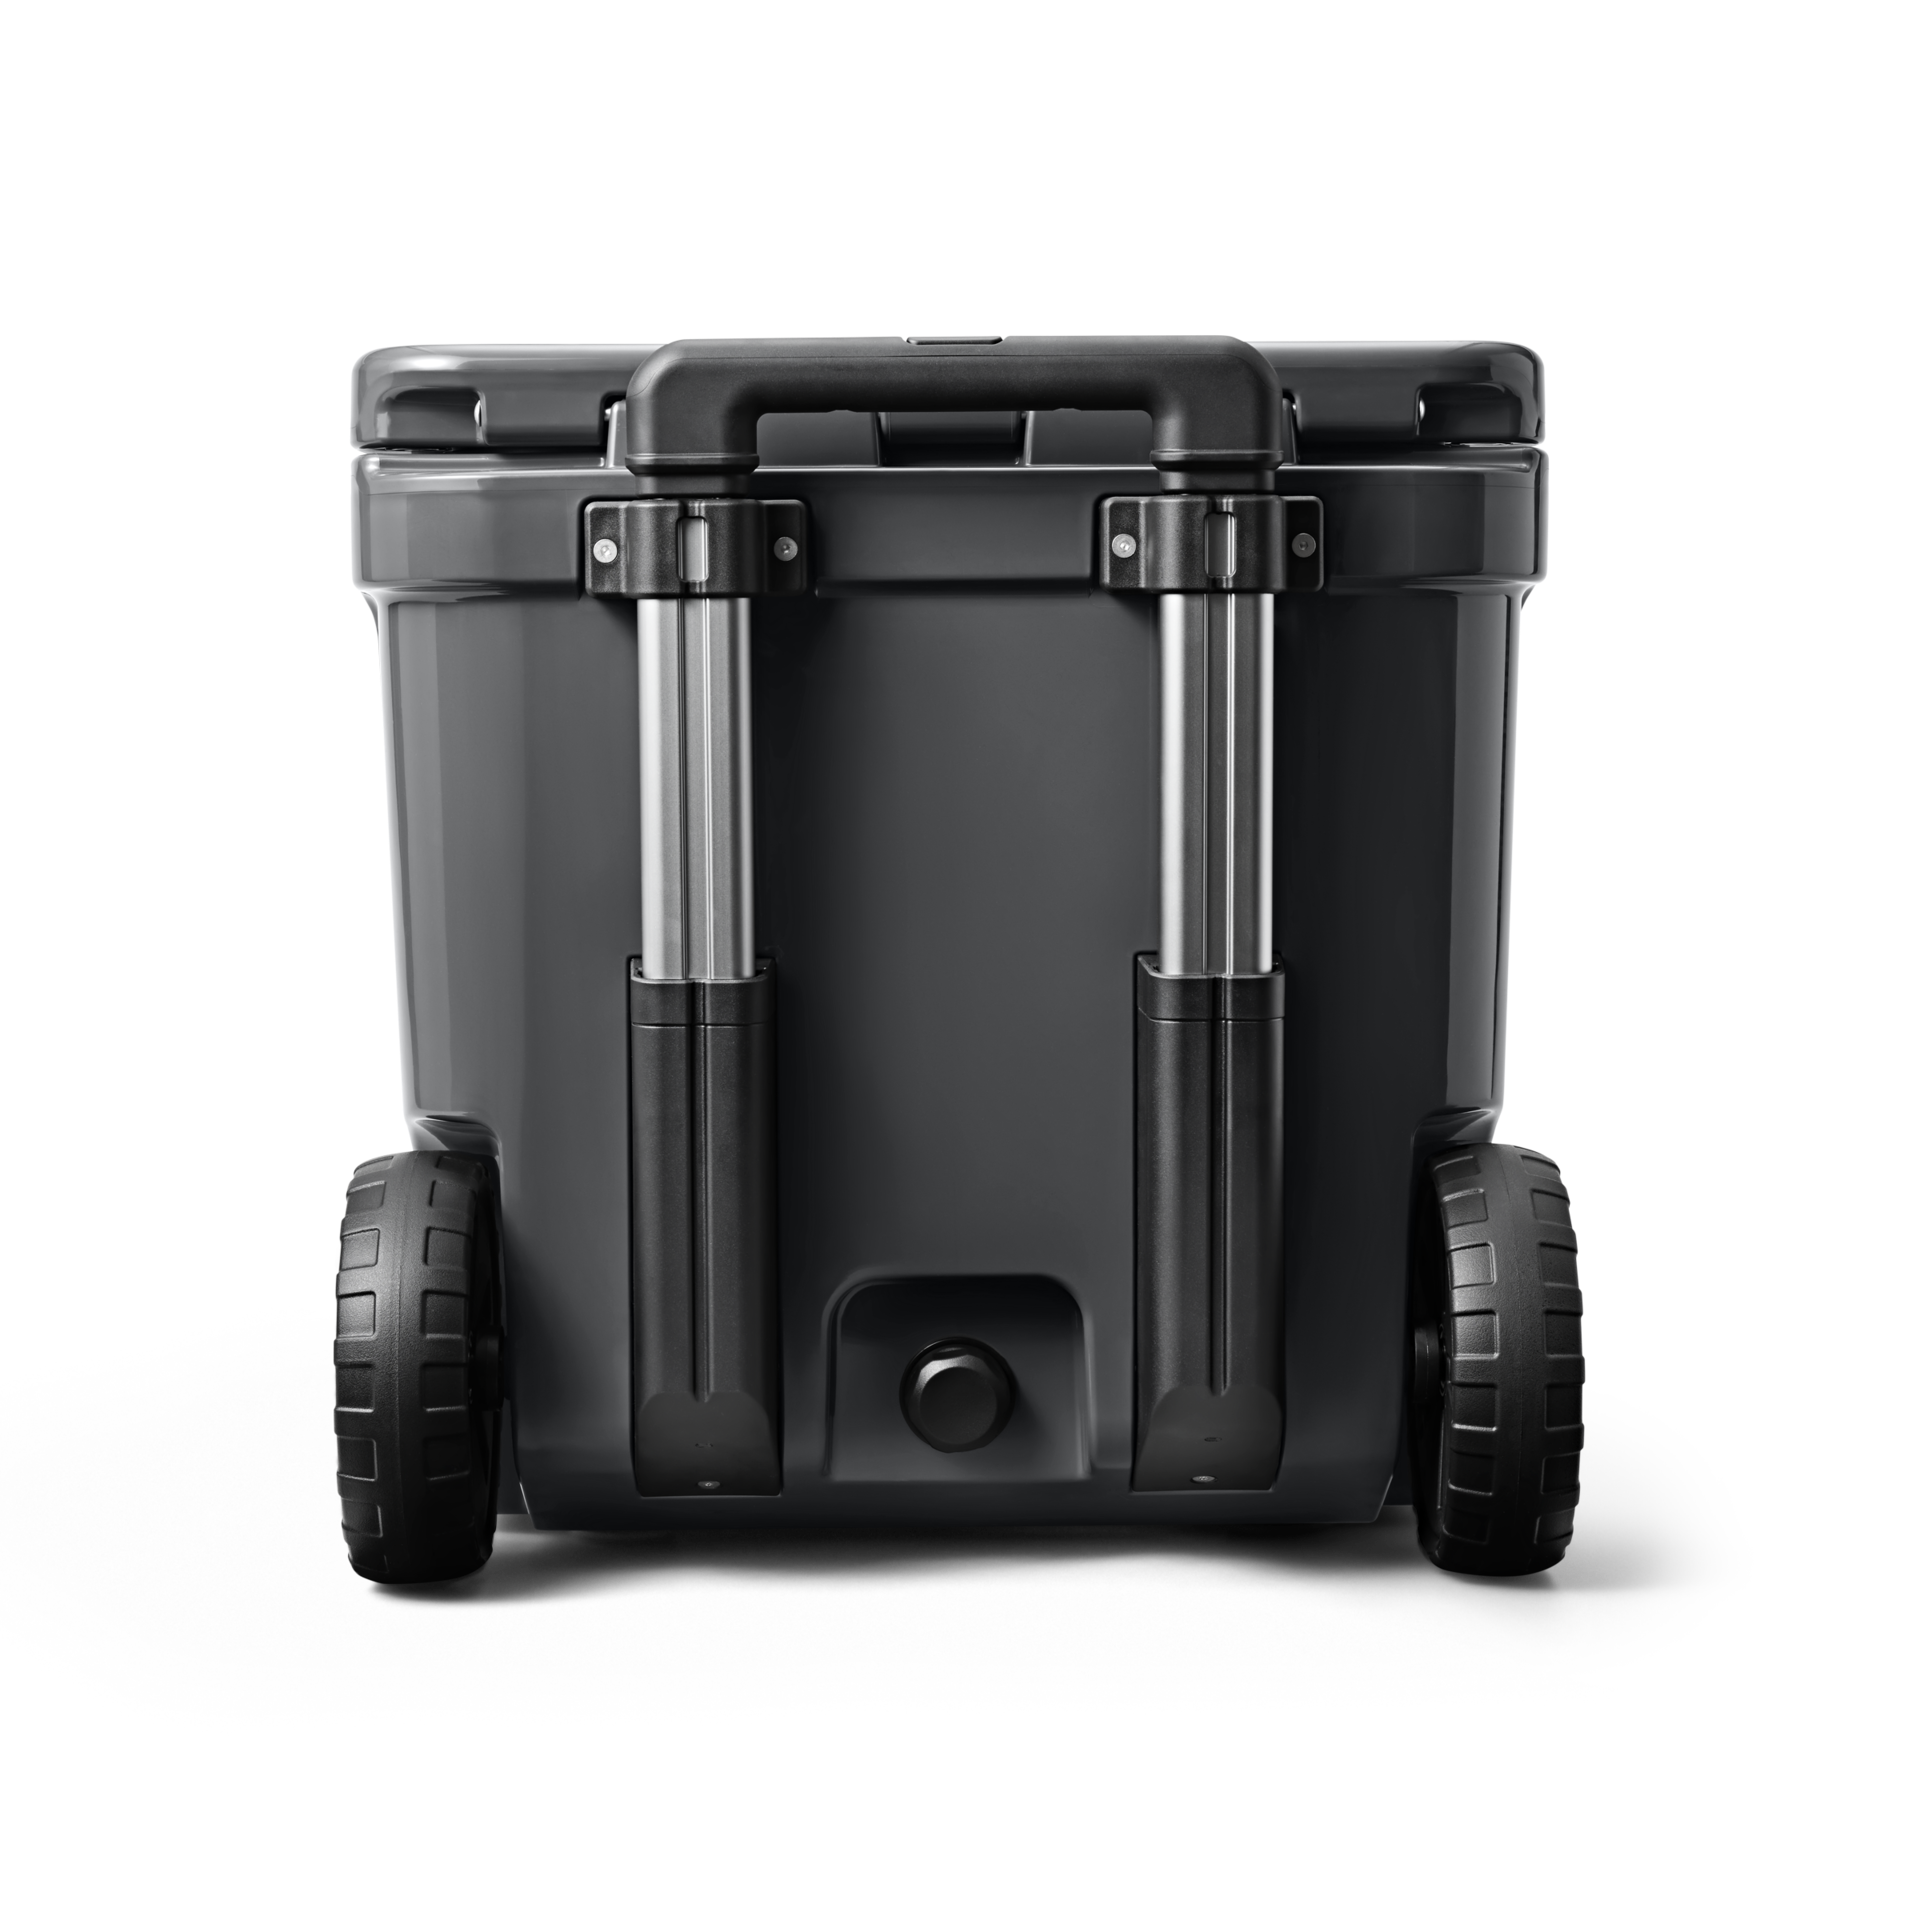 YETI Roadie 48 Wheeled Cooler Review: Convenient, Portable Rolling Cooler